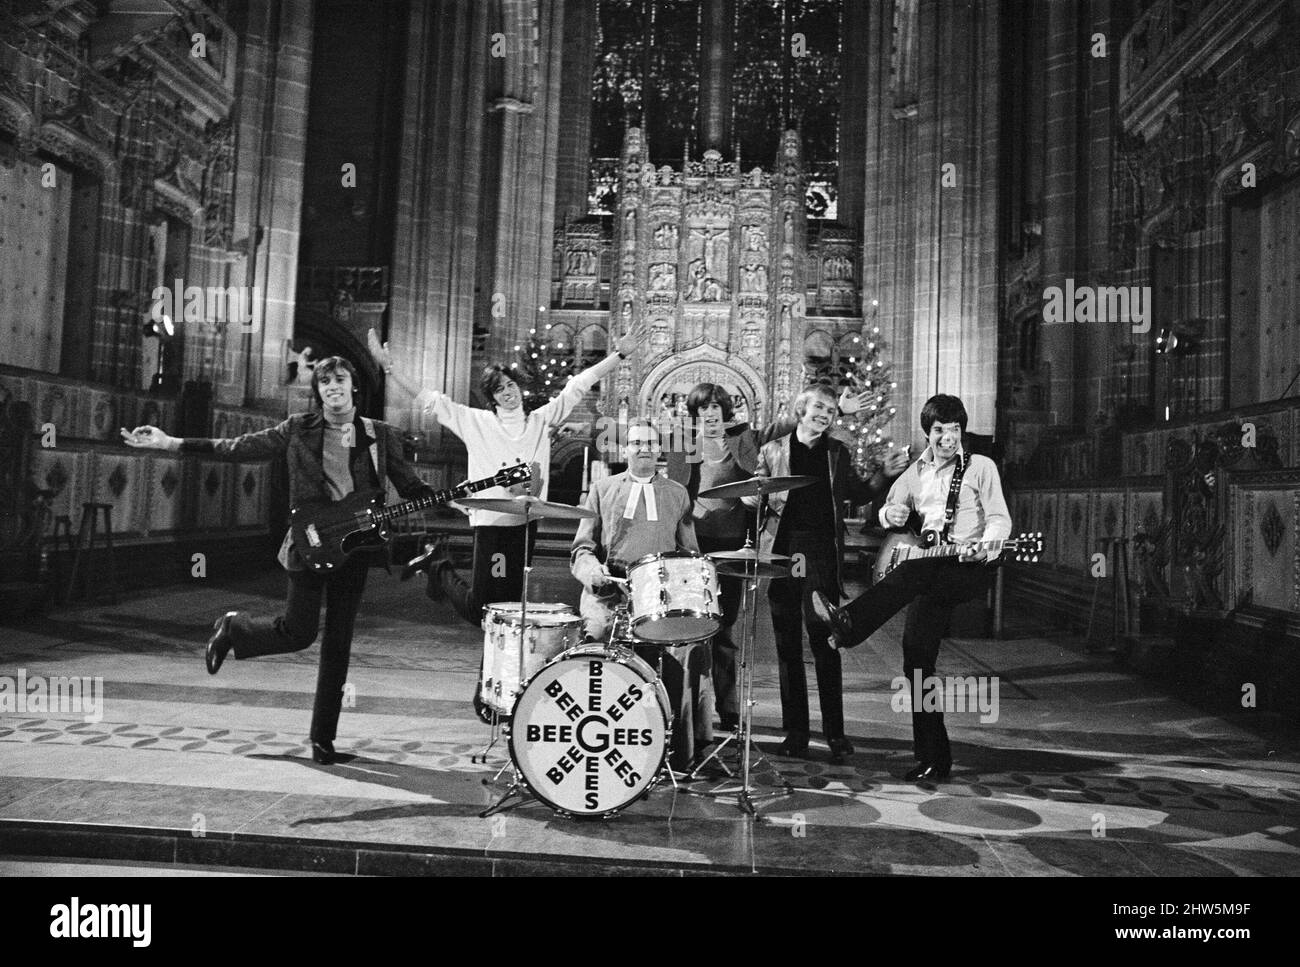 The Bee Gees perform at Liverpool Anglican Cathedral. The Bee Gees are brothers Maurice, Barry and Robin Gibb, Colin Peterson and Vince Malouney. The Dean of Liverpool, Rev. Edward Patey could not resist trying out the drums. 14th December 1967. Stock Photo